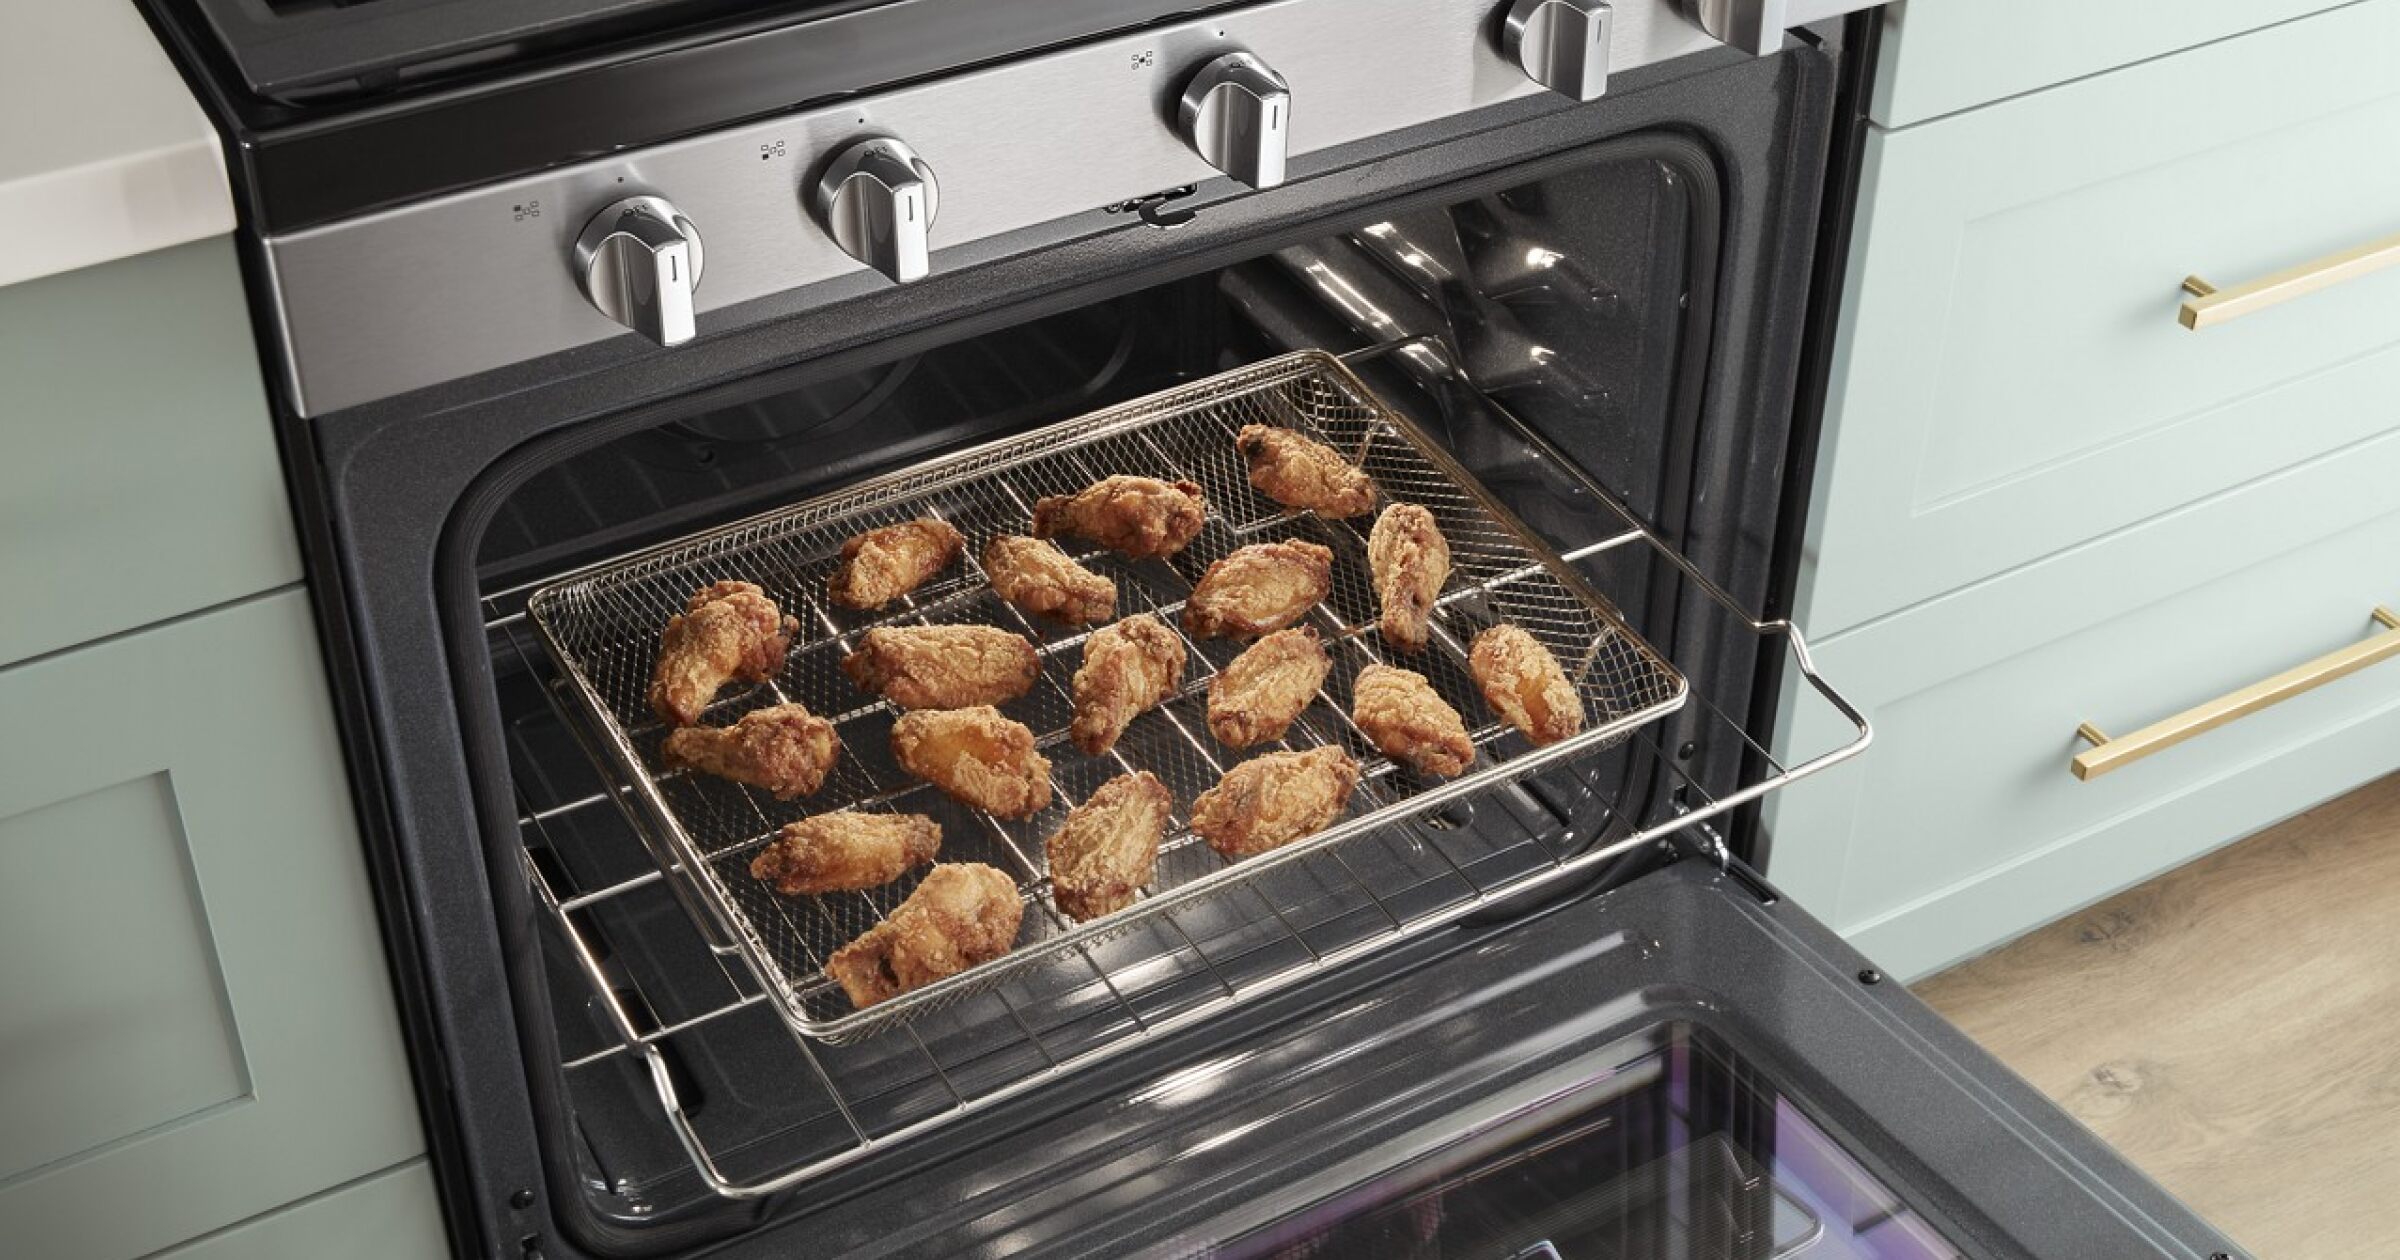 What is the difference between convection bake and roast?